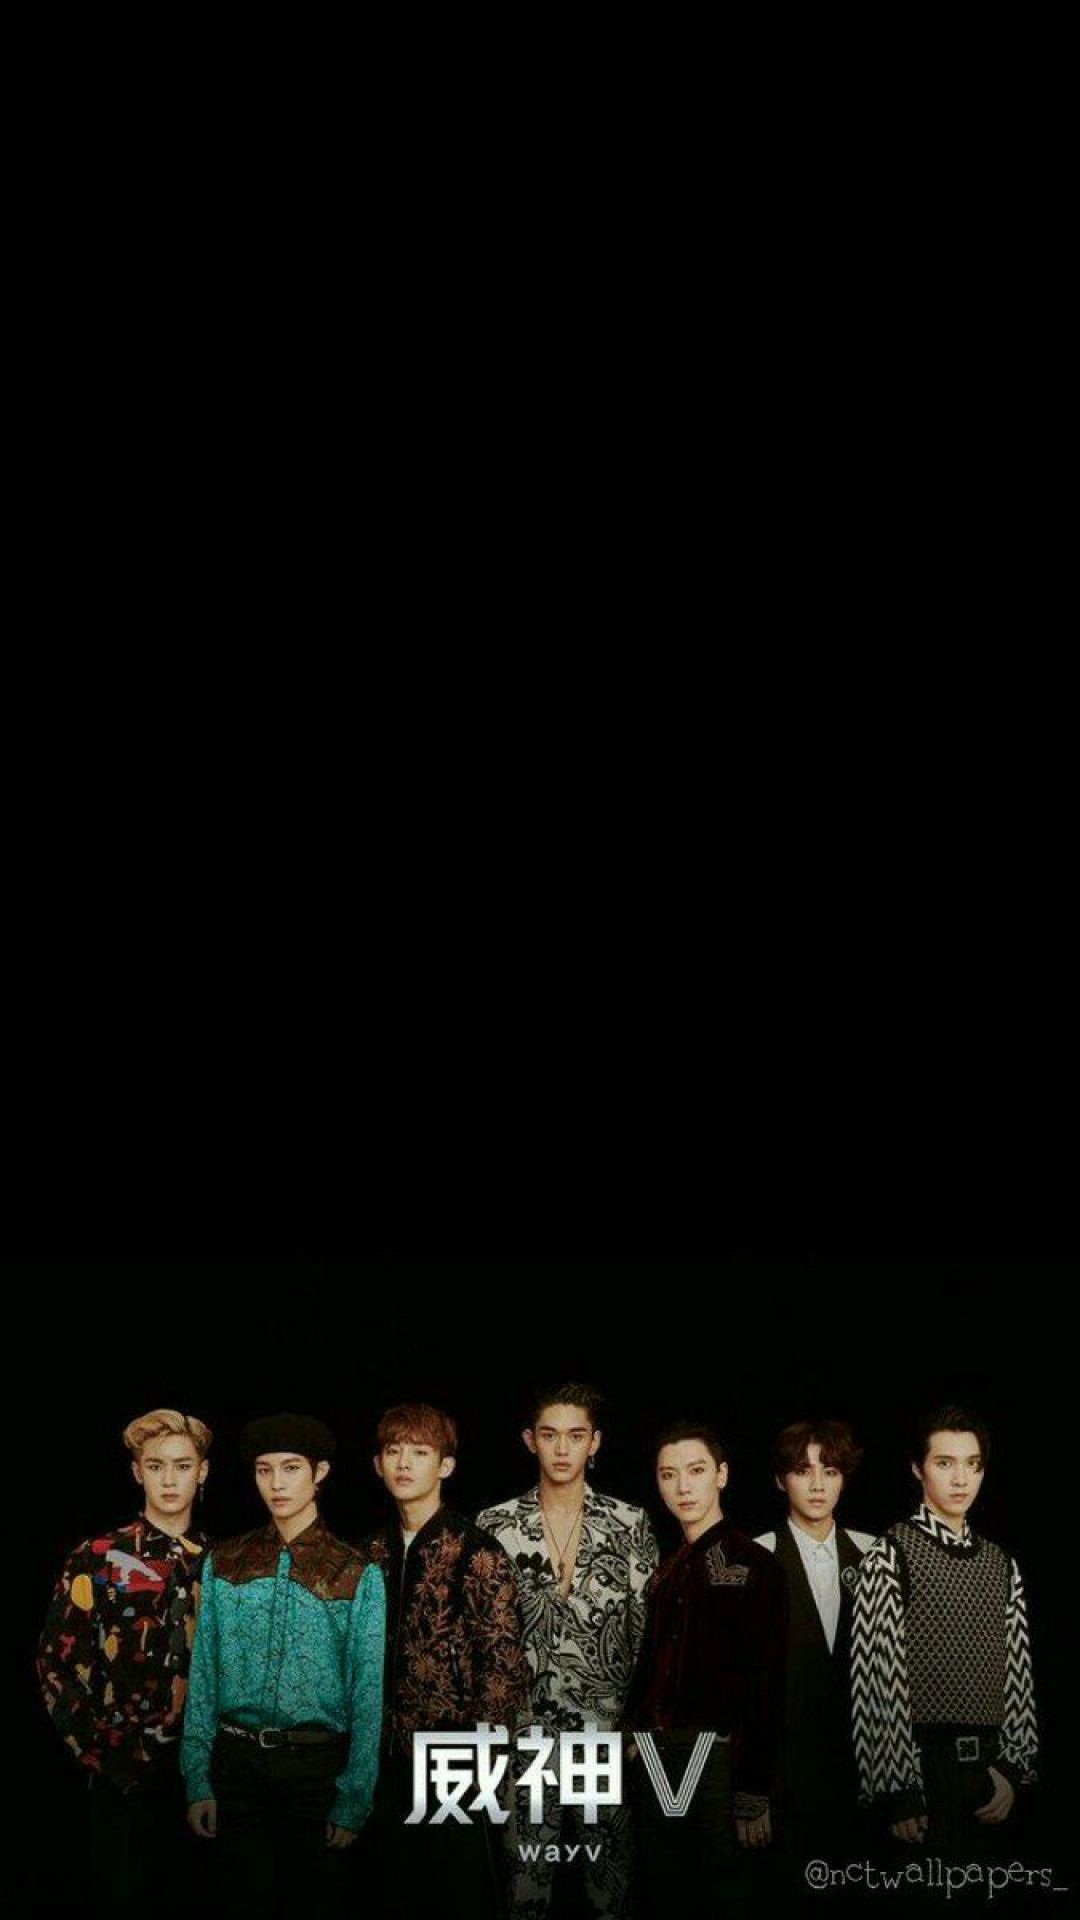 ✓[85+] NCT Wallpaper - Android, iPhone, Desktop HD Backgrounds / Wallpapers  (1080p, 4k) (png / jpg) (2023)